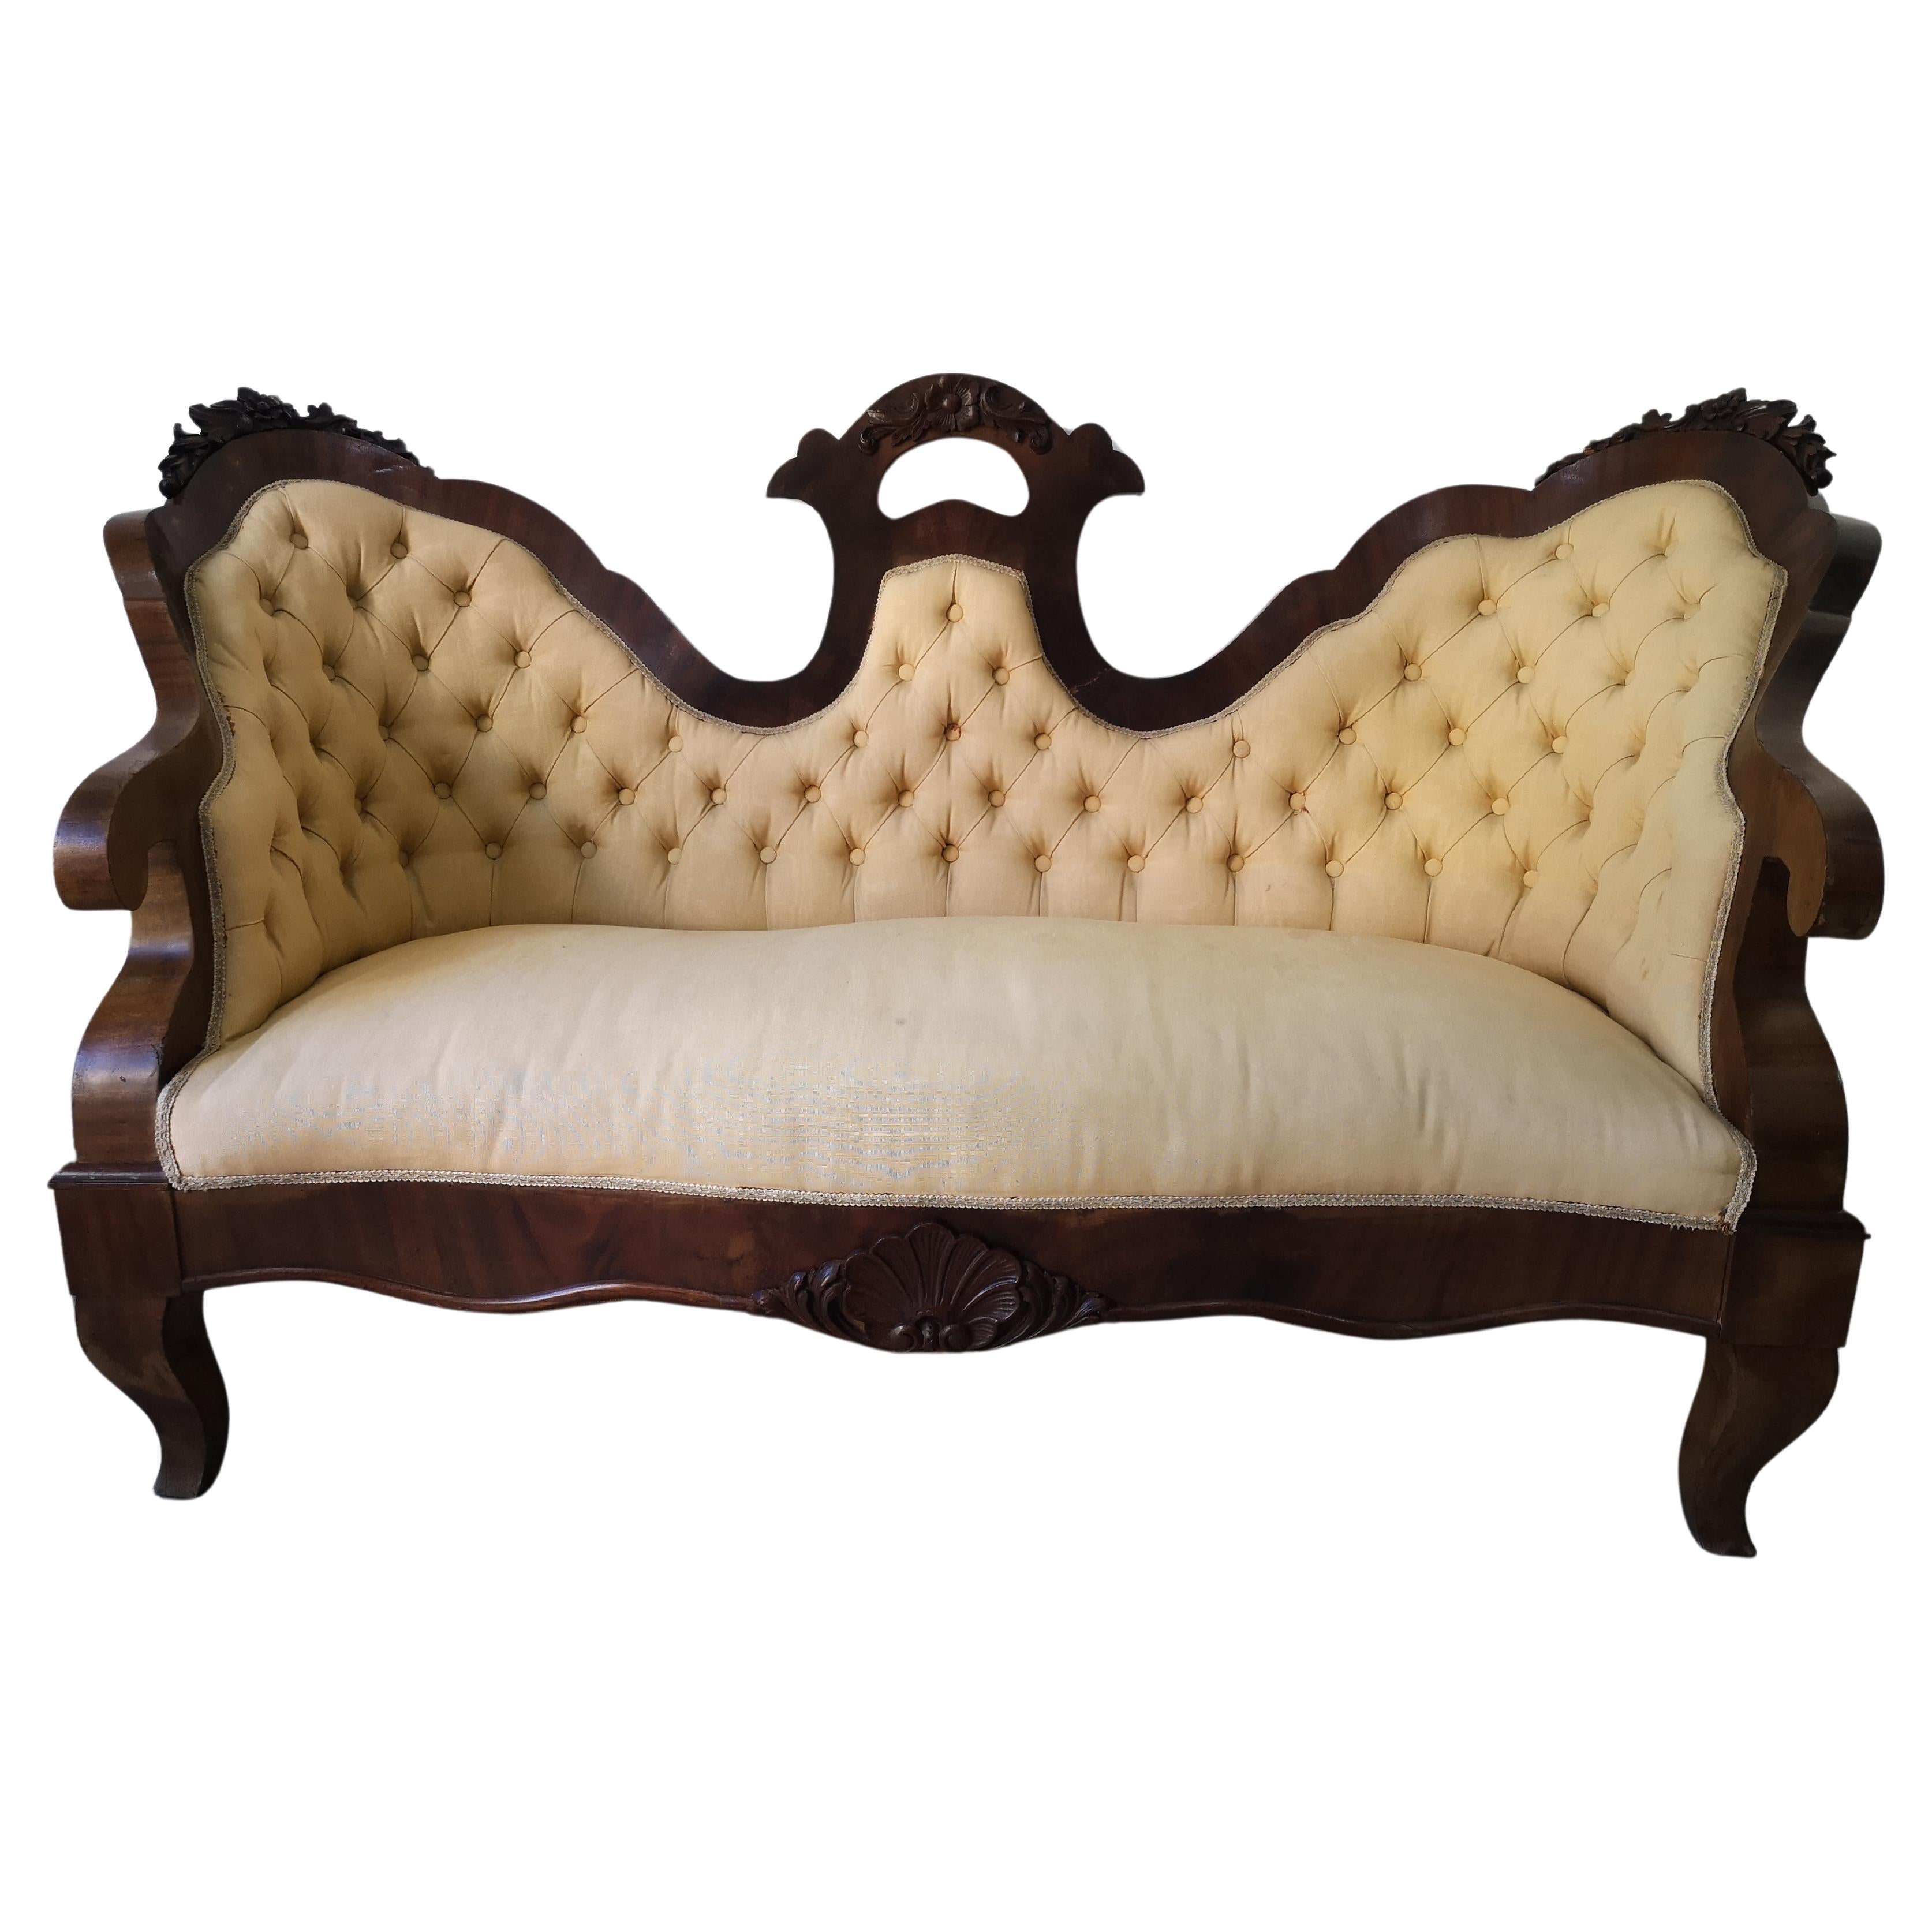 Two-seater Louis Philippe sofa in walnut and fabric, 19th century era For Sale